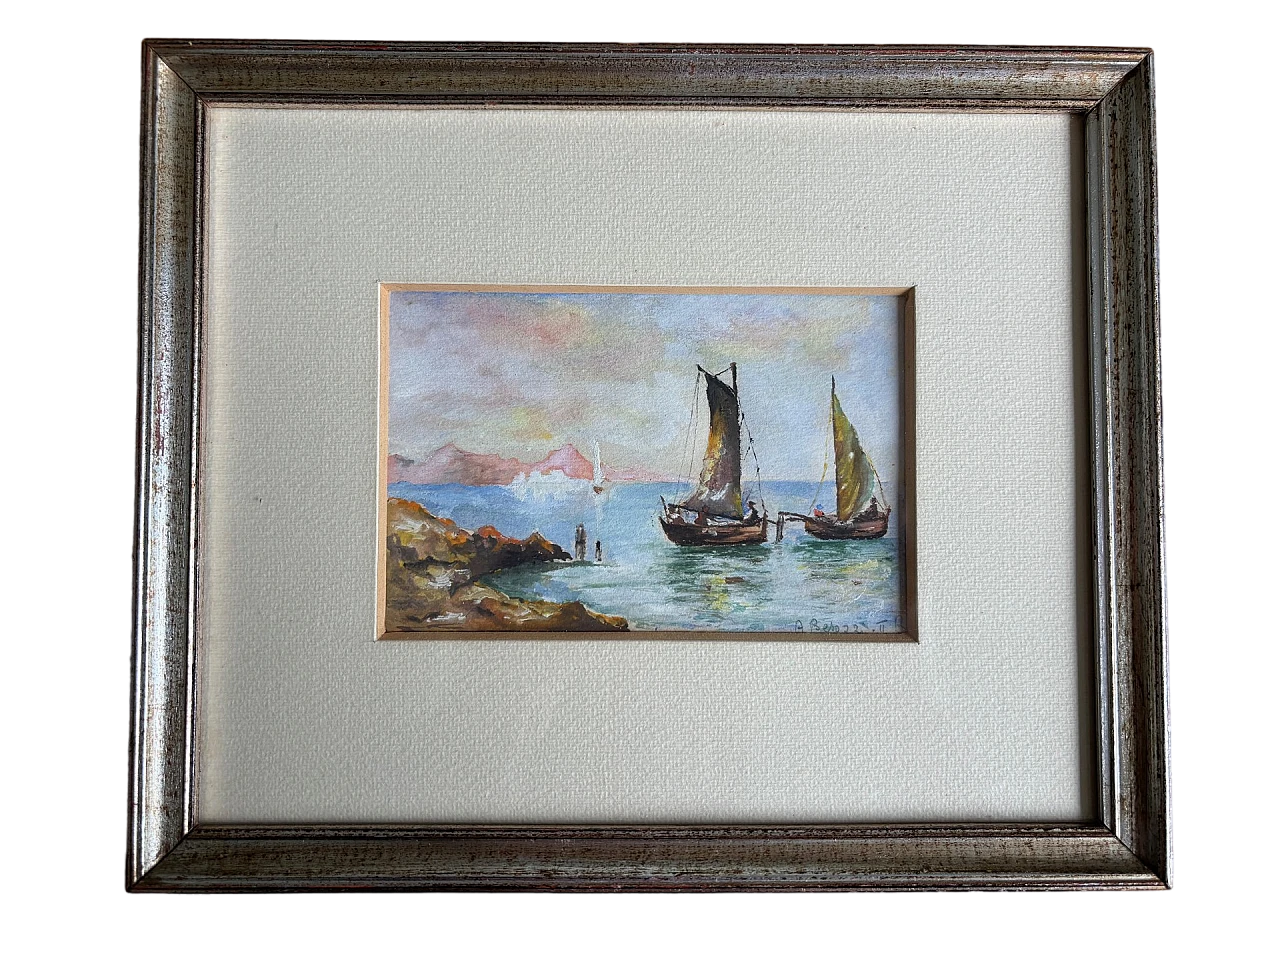 A. Besozzi, seascape with boats, painting, 1930s 5